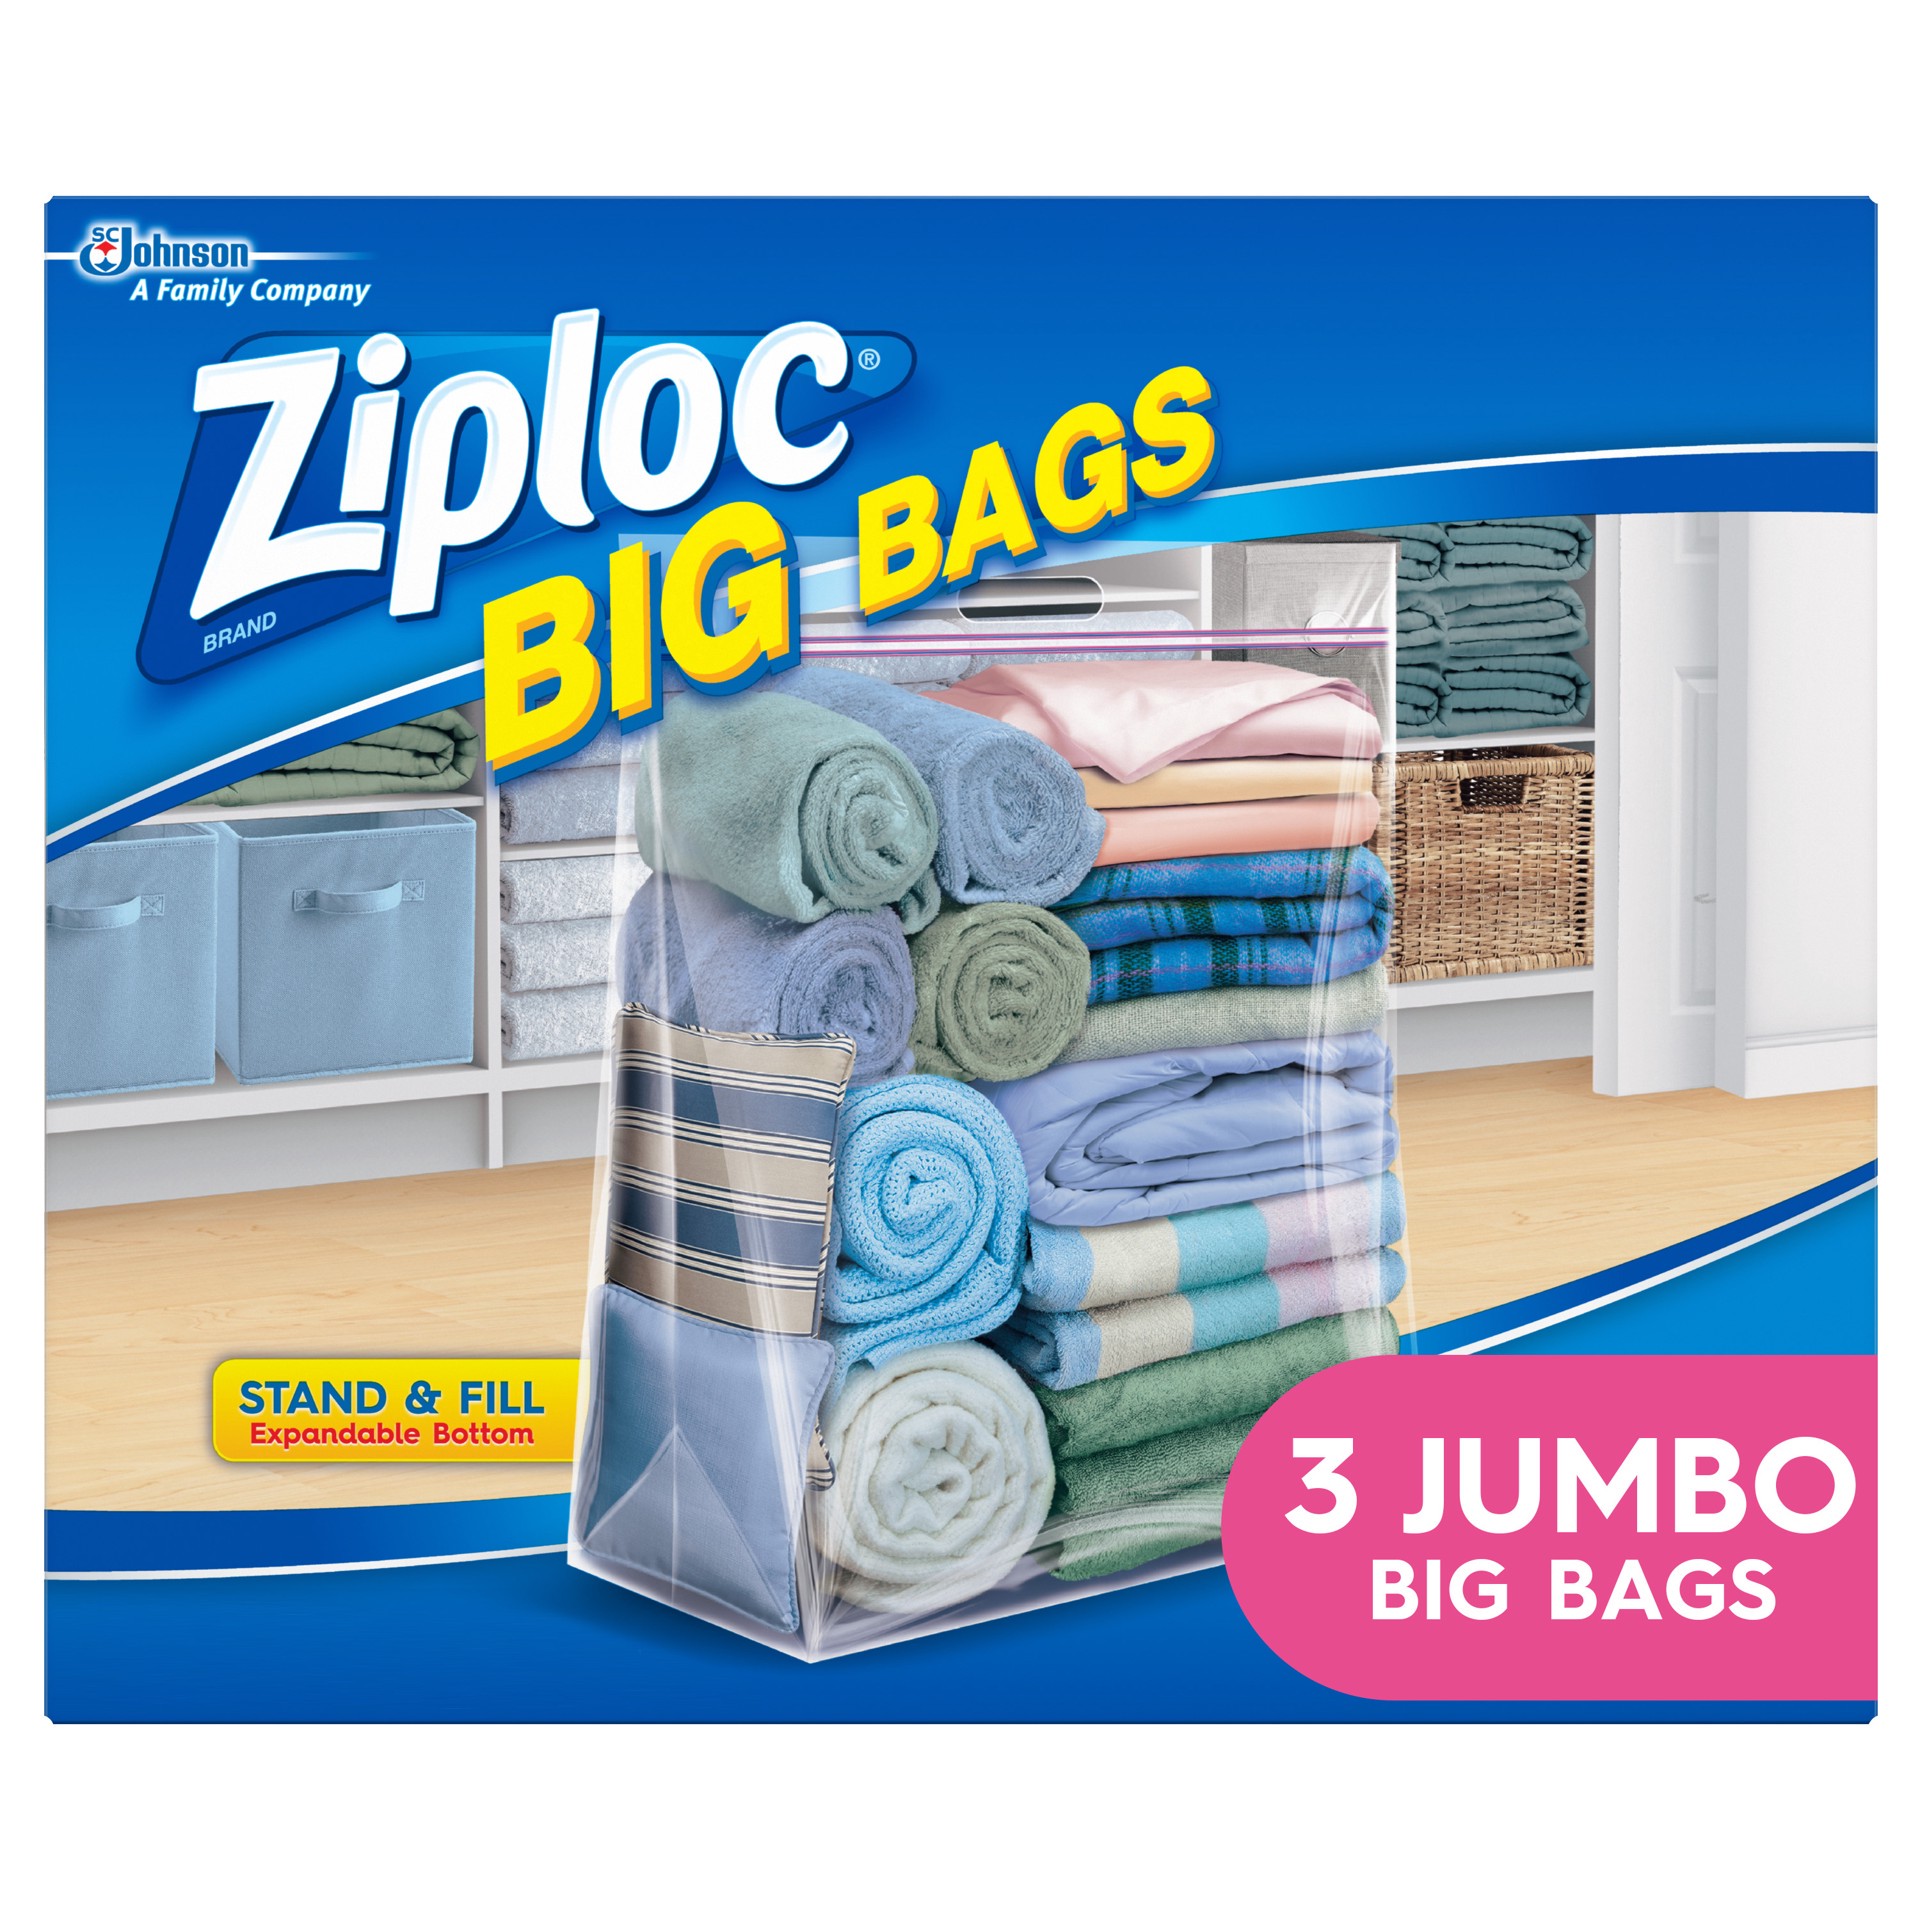 slide 4 of 5, Ziploc Big Bags, Jumbo, Secure Double Zipper, 3 CT, Expandable Bottom, Heavy-Duty Plastic, Built-In Handles, Flexible Shape to Fit Where Storage Boxes Can't, 3 ct